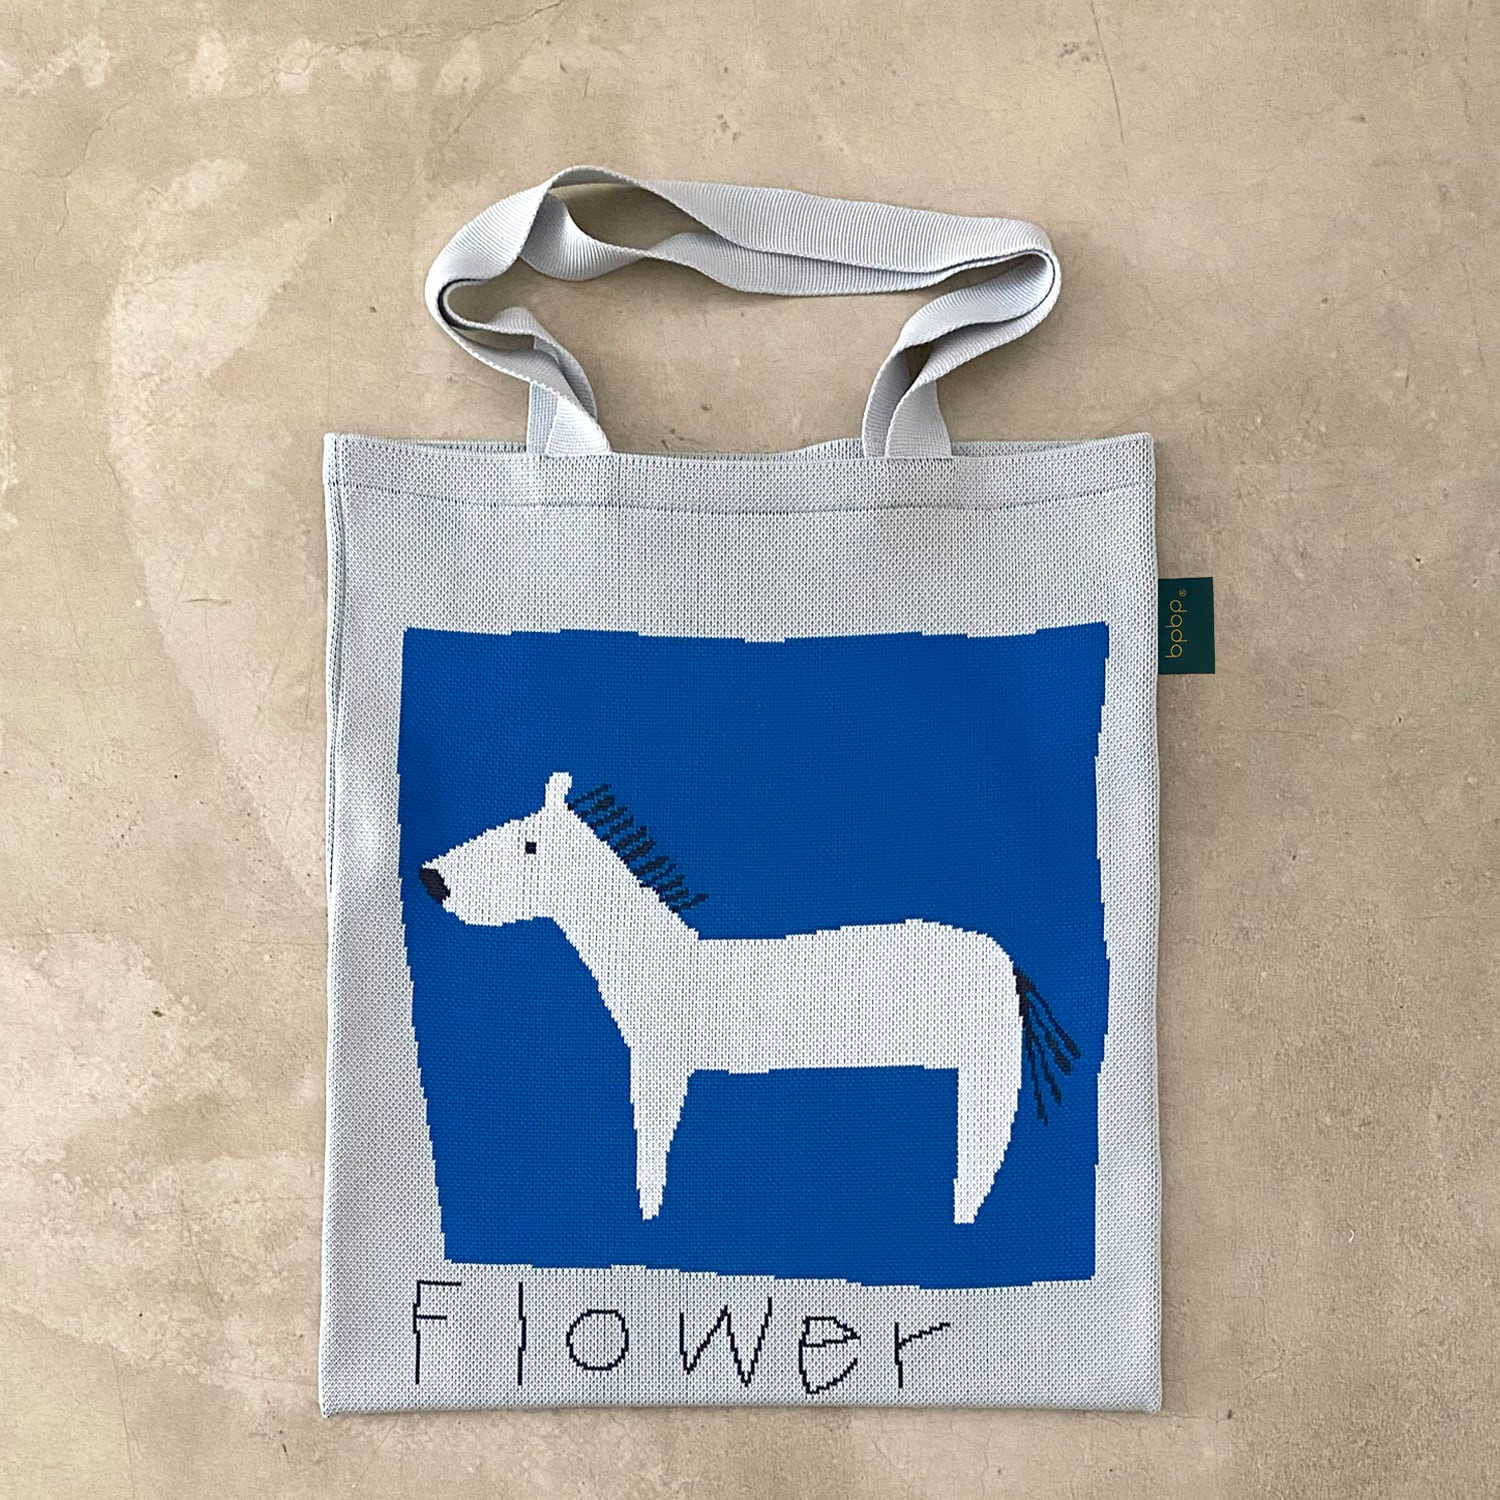 【JIN KITAMURA】北村人 KNIT TOTE BAG 白い馬 ニットトートバッグ | bpbp powered by BASE